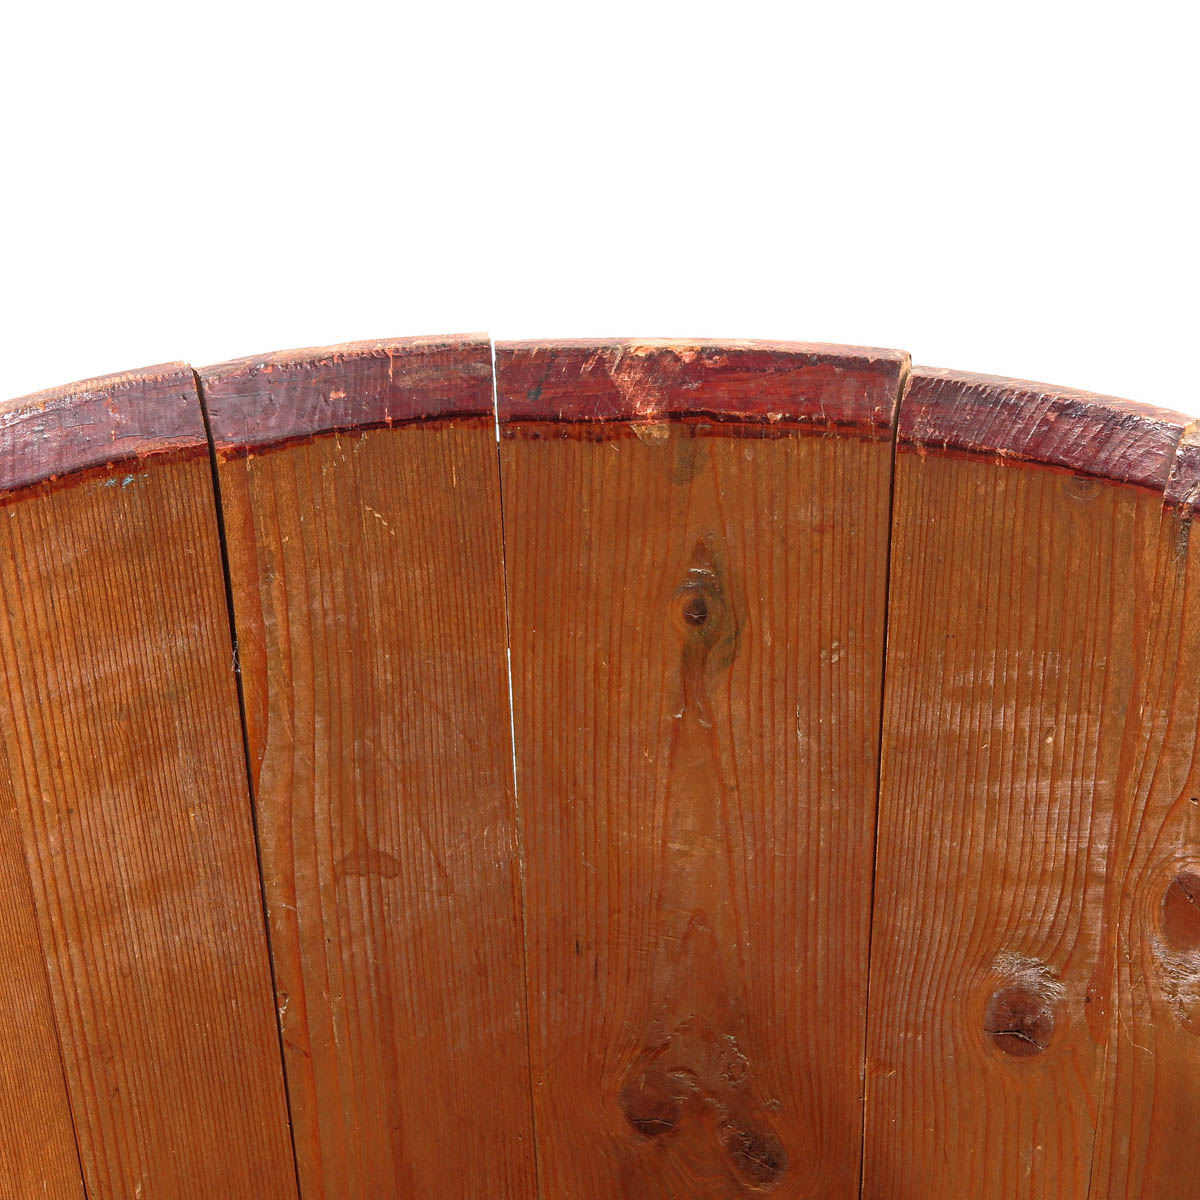 An 18th Century Butter Barrel - Image 8 of 10